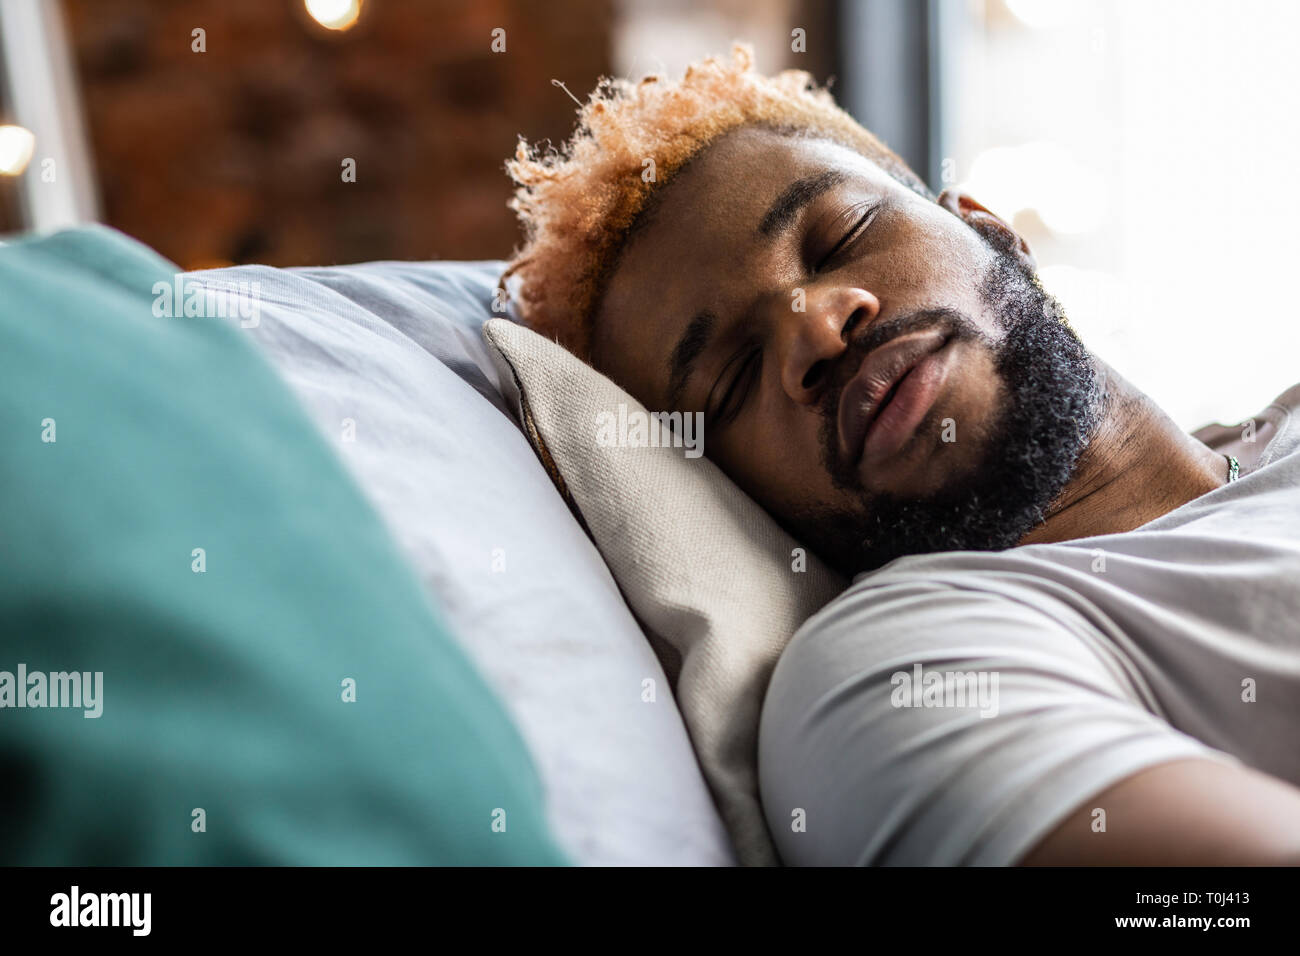 Nice pleasant young man sleeping on his bed Stock Photo